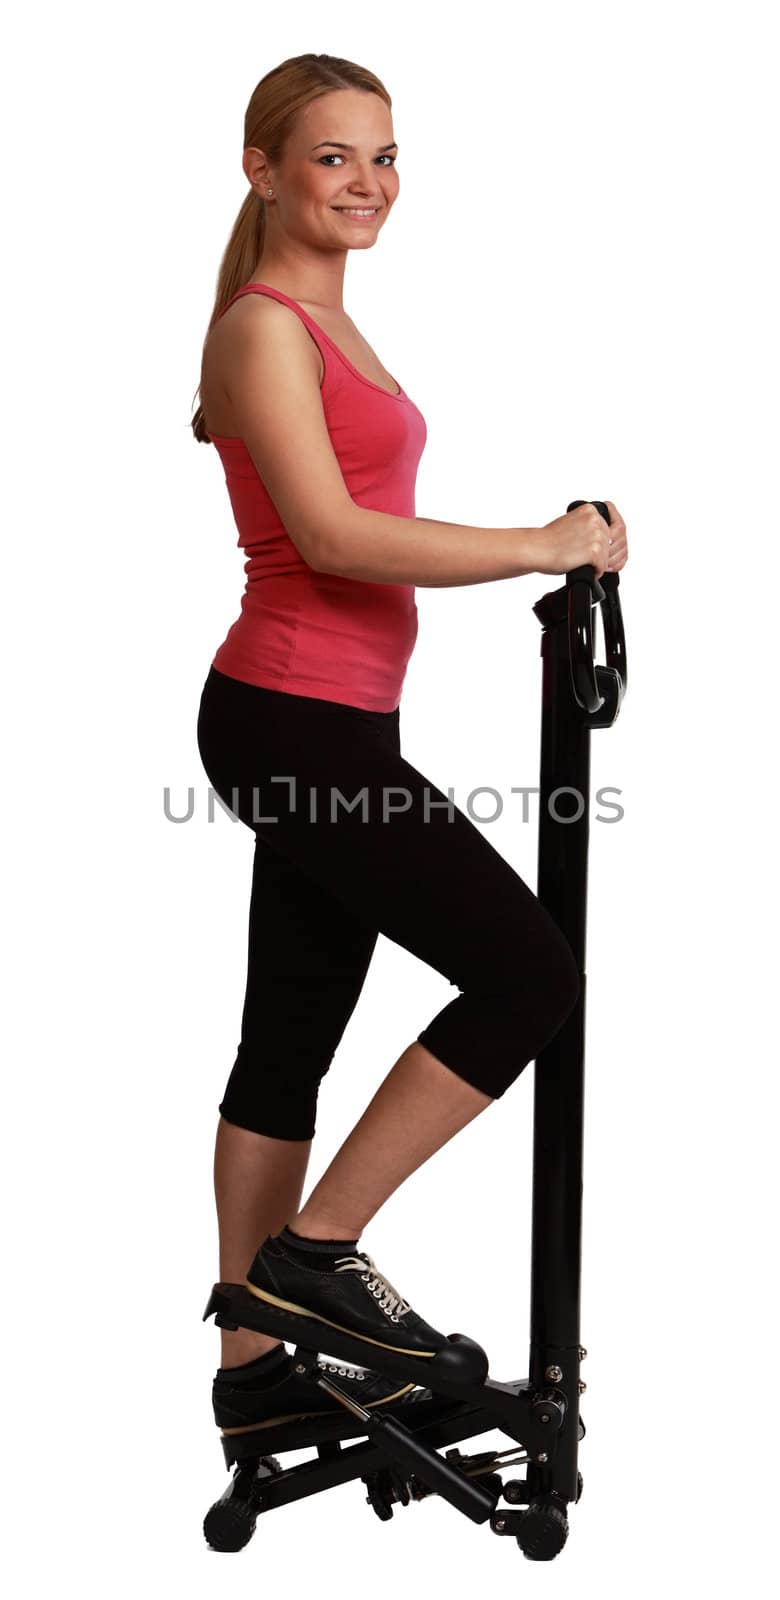 Blonde Woman Exercising on a Stepper by RazvanPhotography